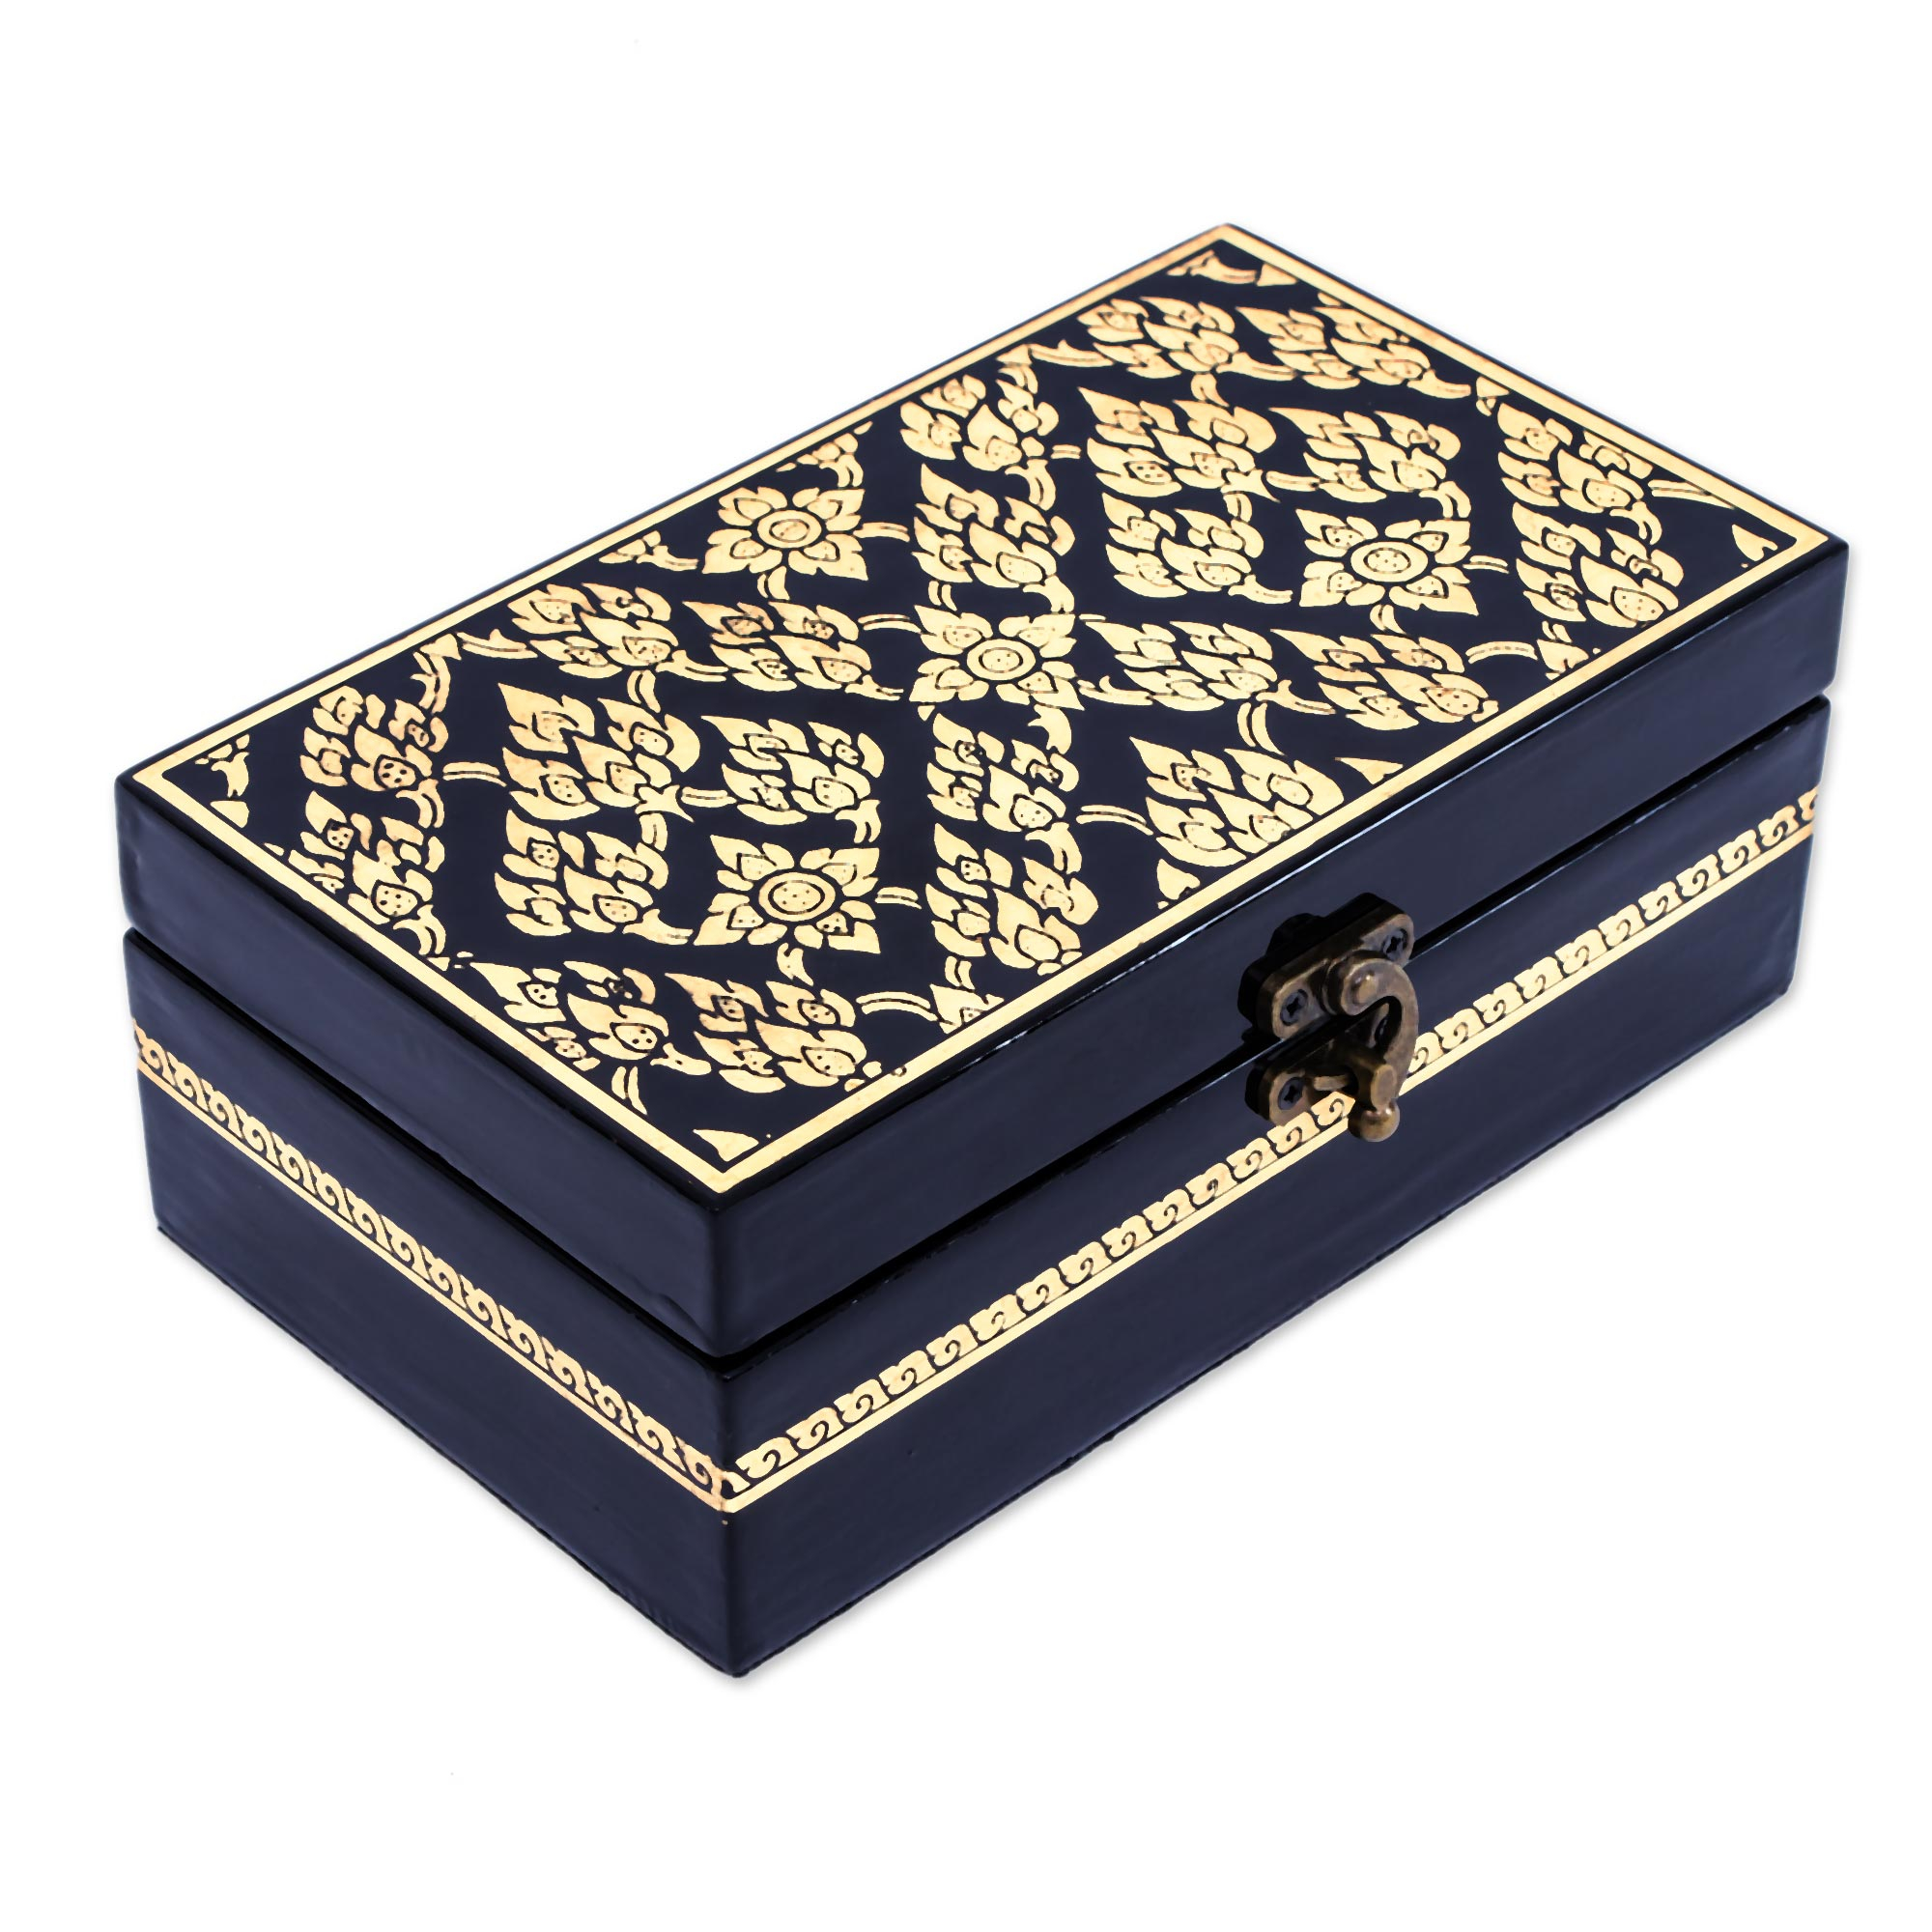 Handcrafted Floral Thai Lacquered Wood Jewelry Box - Golden Lotus ...